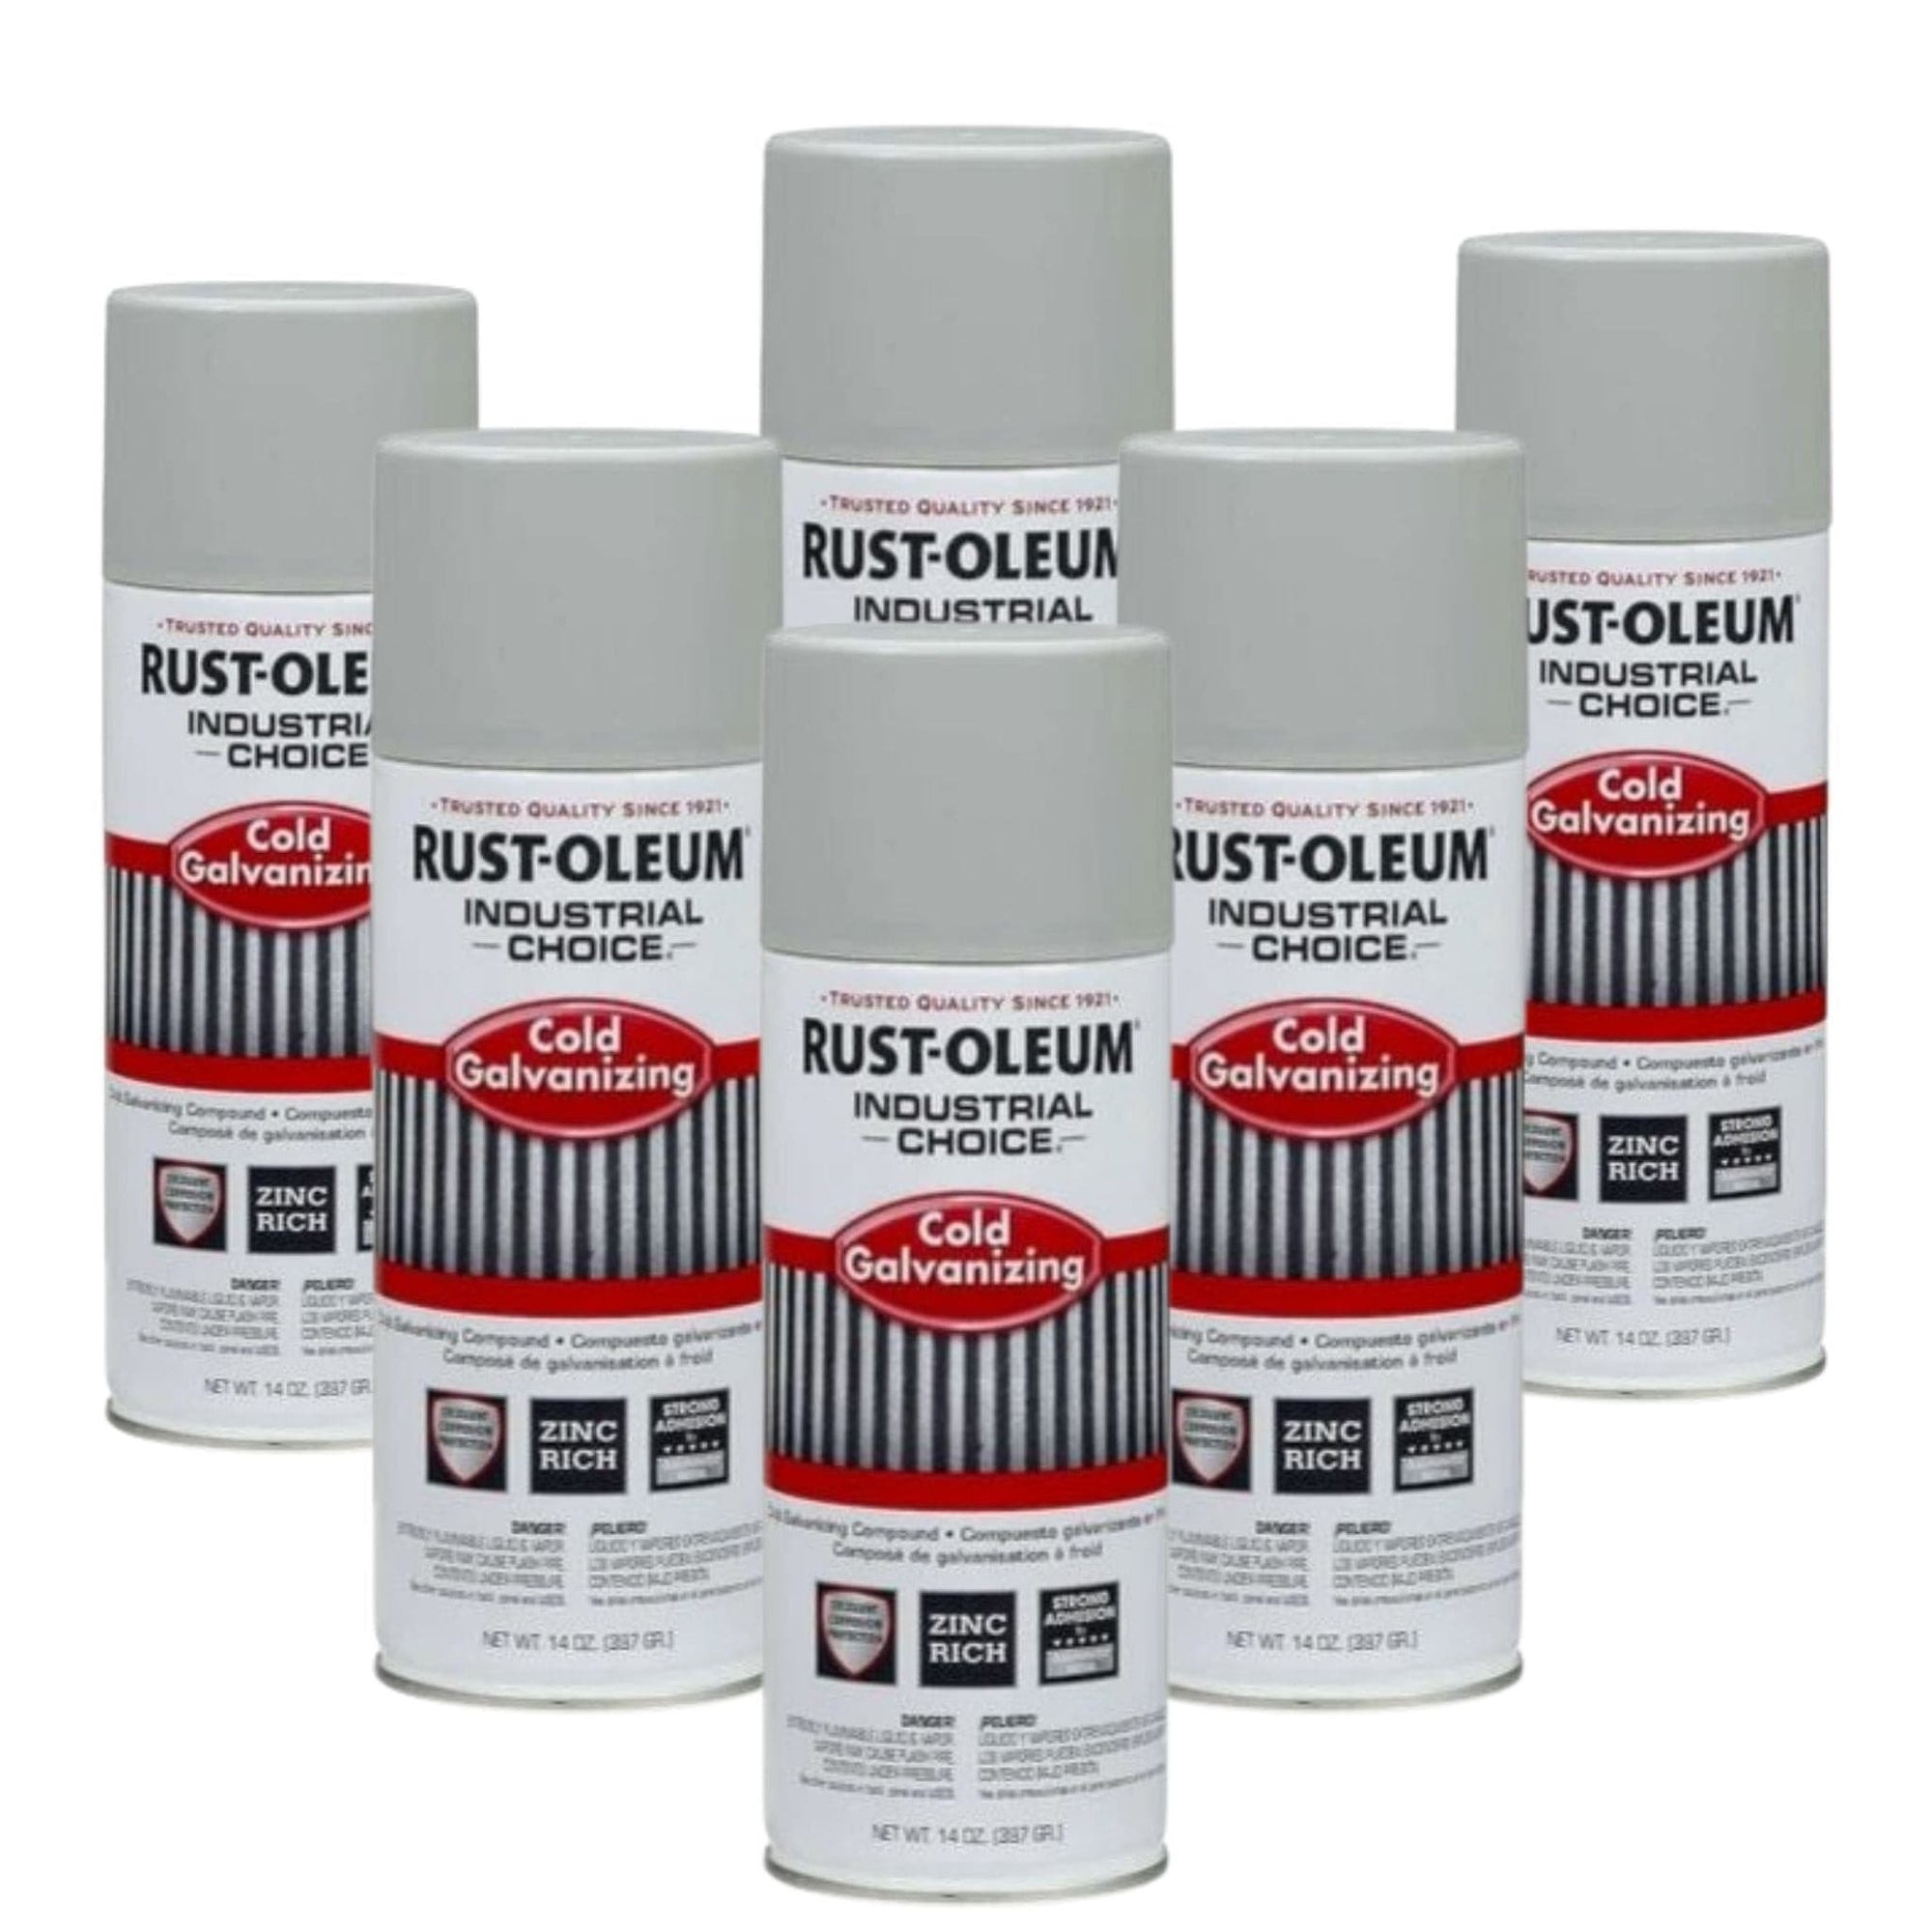 (6 Pack) Rustoleum Cold Gal Flat Zinc Rich Galvanising Spray - 397g x 6 cans - South East Clearance Centre